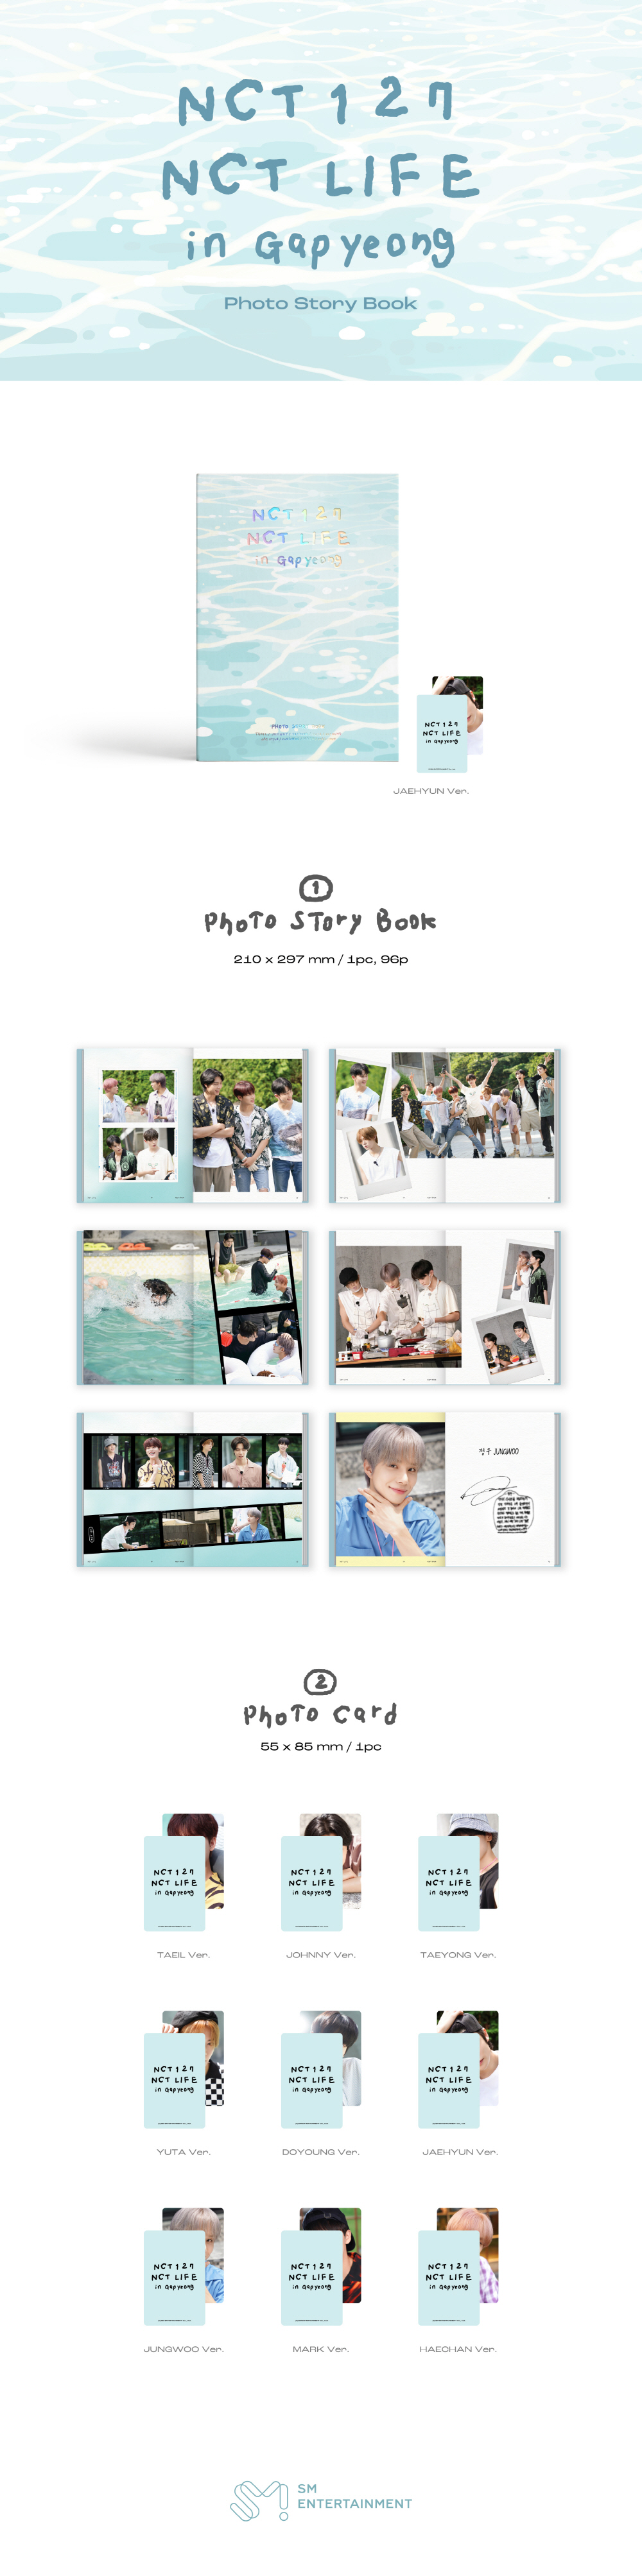 NCT 127 [NCT LIFE in Gapyeong] PHOTO STORY BOOK (JAEHYUN) nct127 photobook NCT127Gapyeong NCTLIFE Gapyeong PHOTOSTORYBOOK